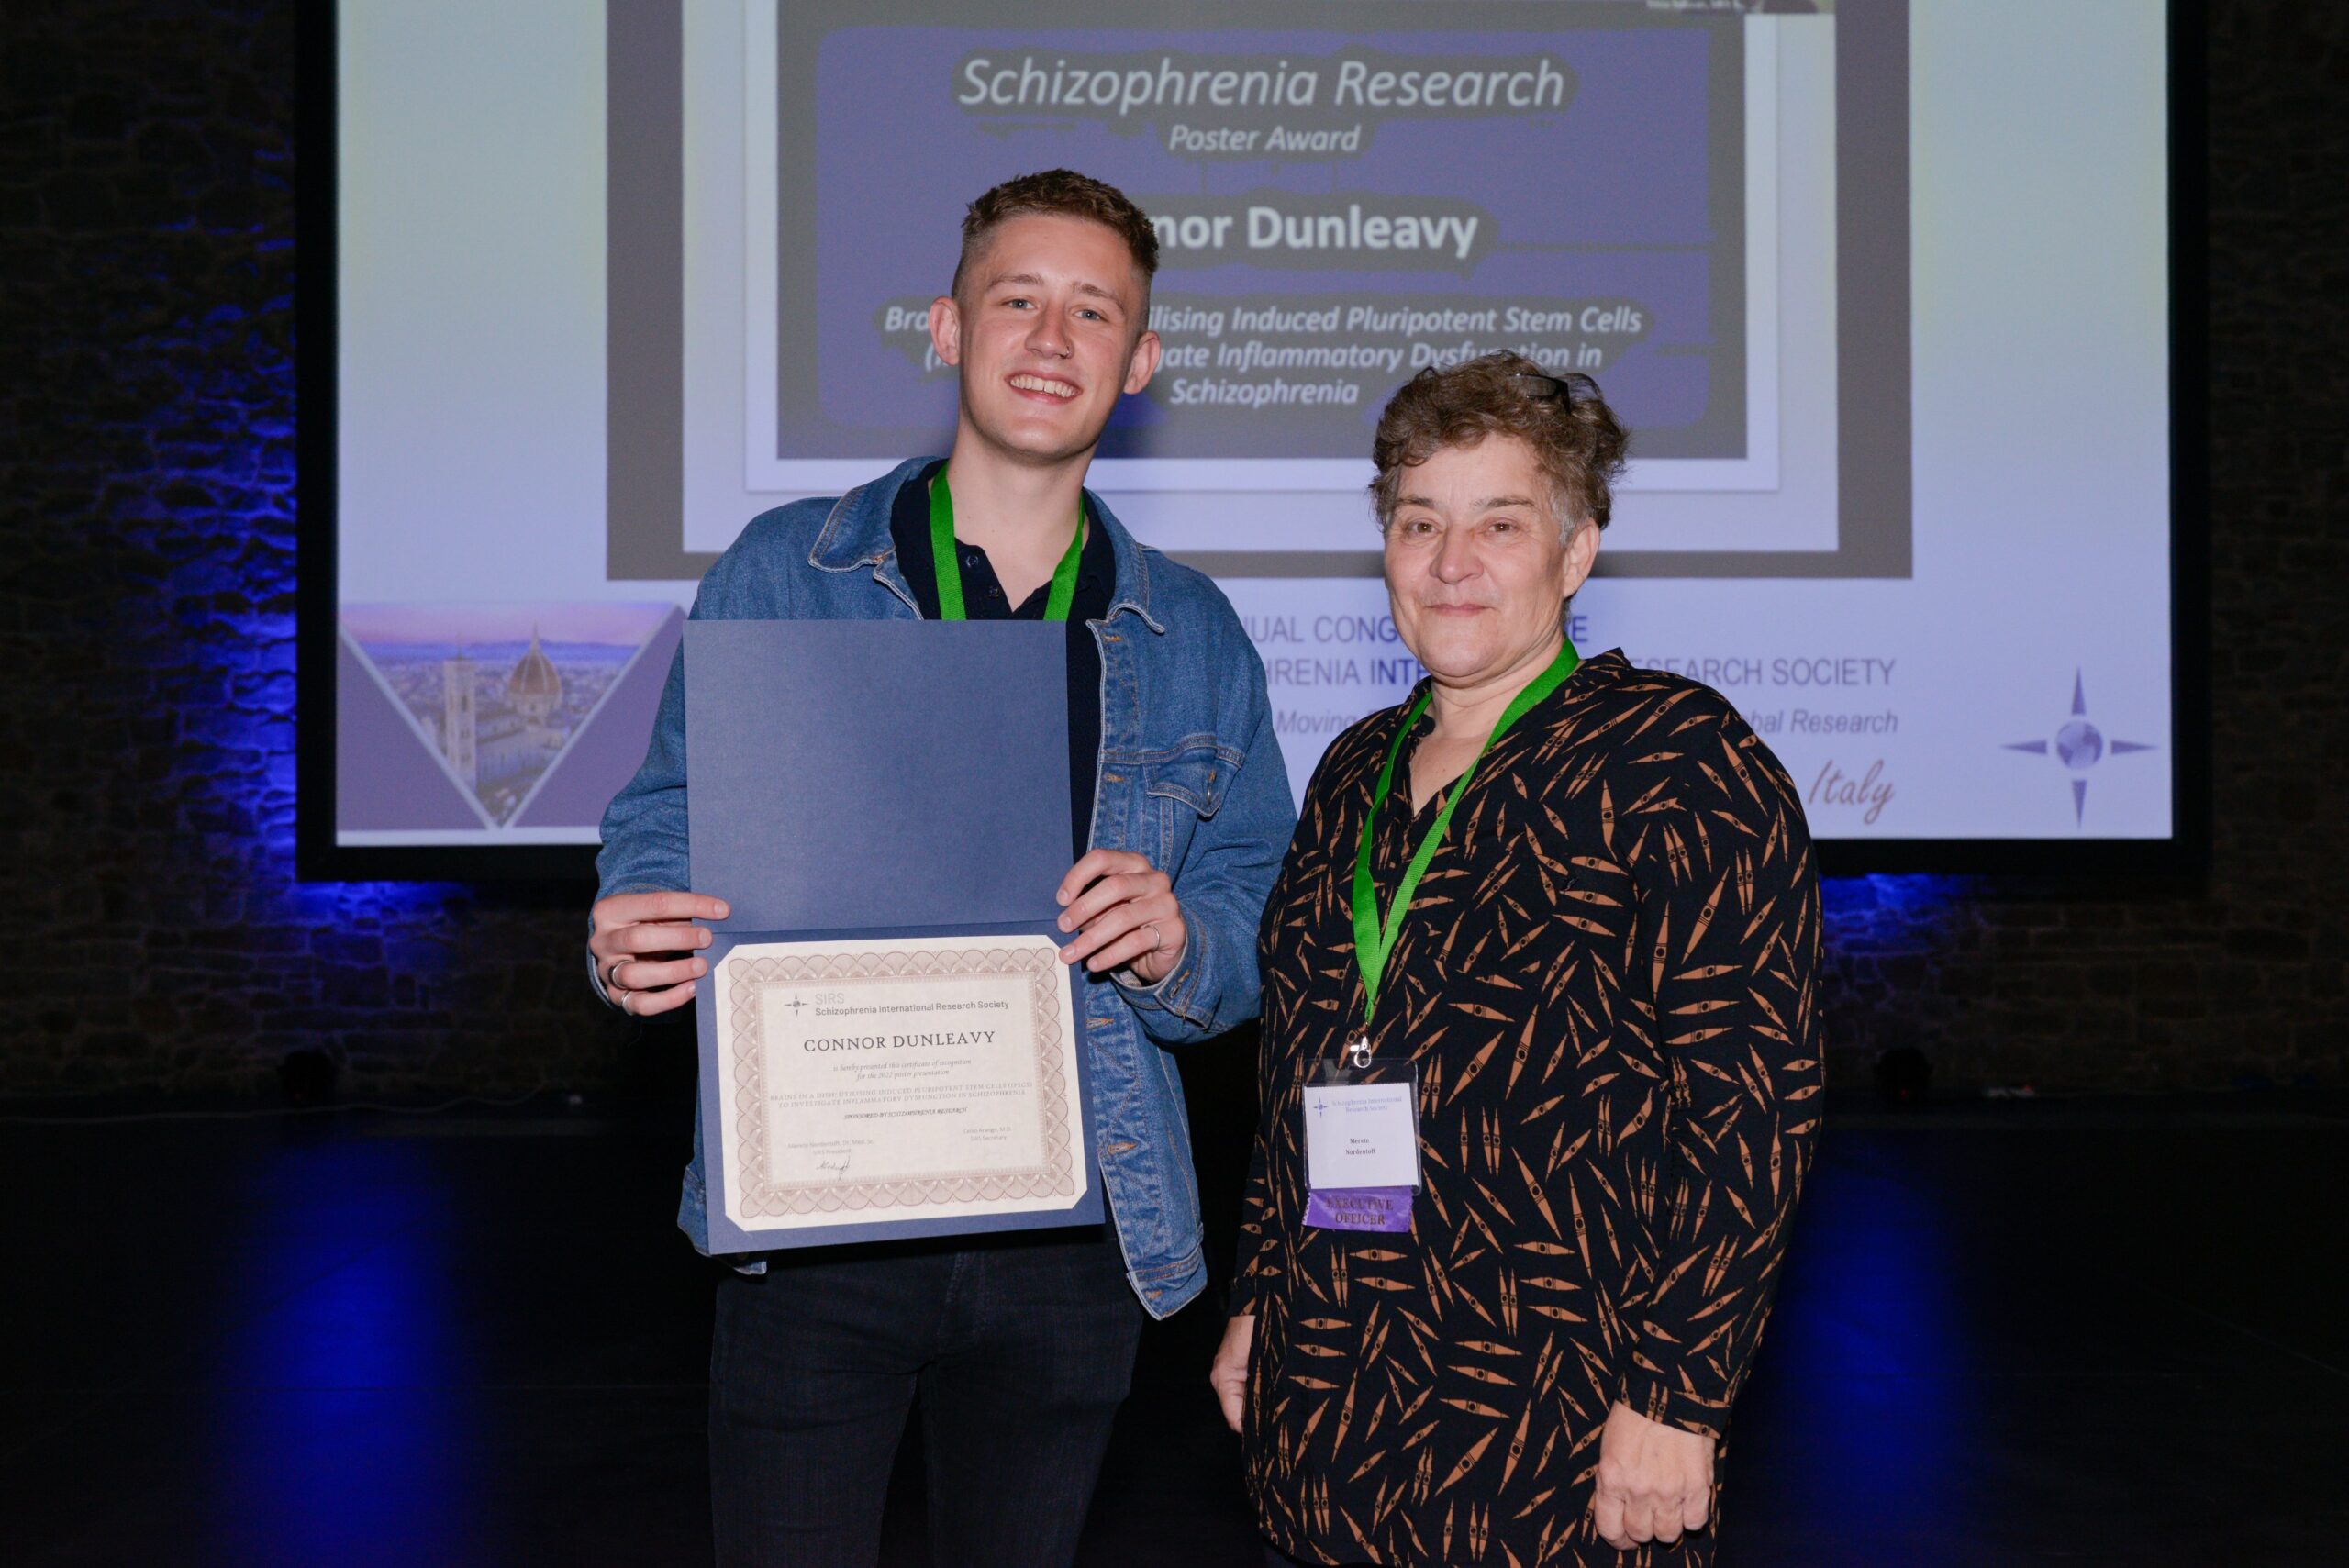 Connor Dunleavy with a certificate of recognition for receiving a Schizophrenia Research Poster Award from the Schizophrenia International Research Society.